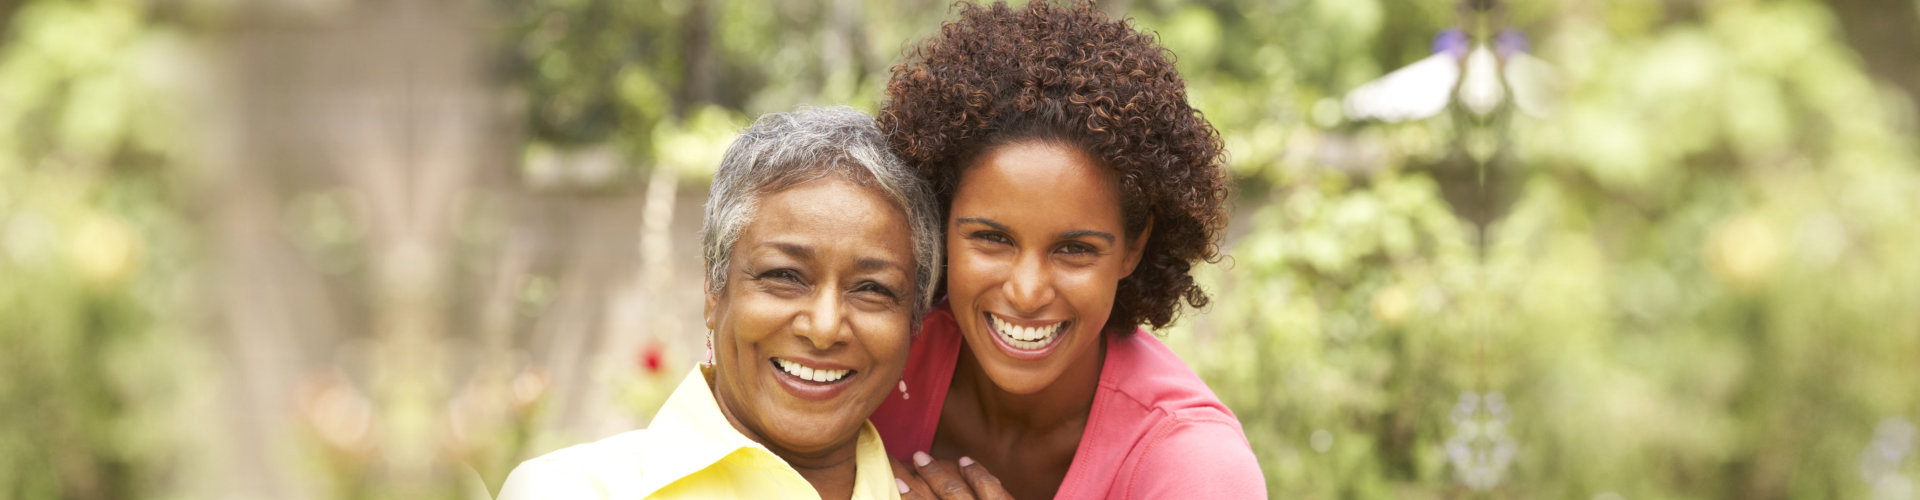 caregiver and senior on outdoor smiling